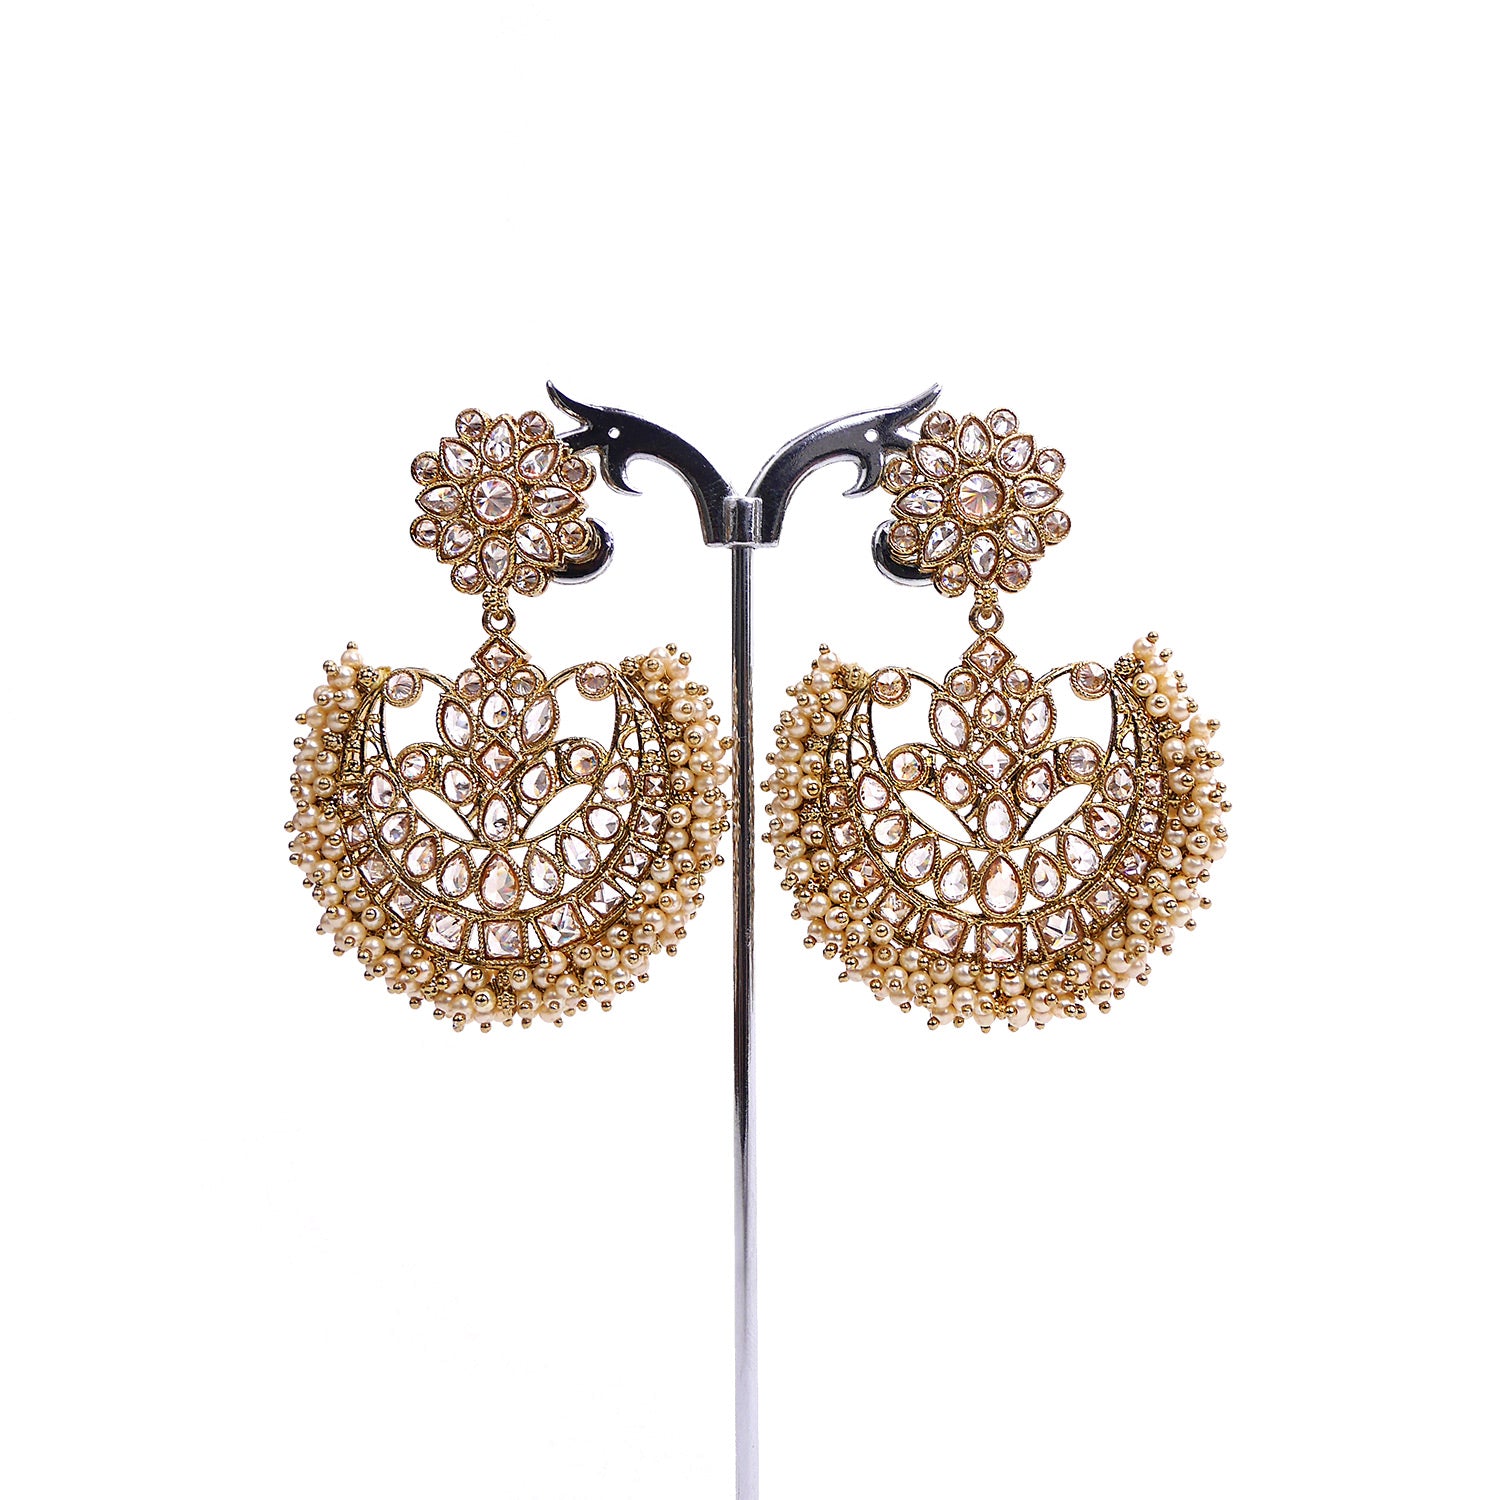 Round Drop Earrings with Pearls